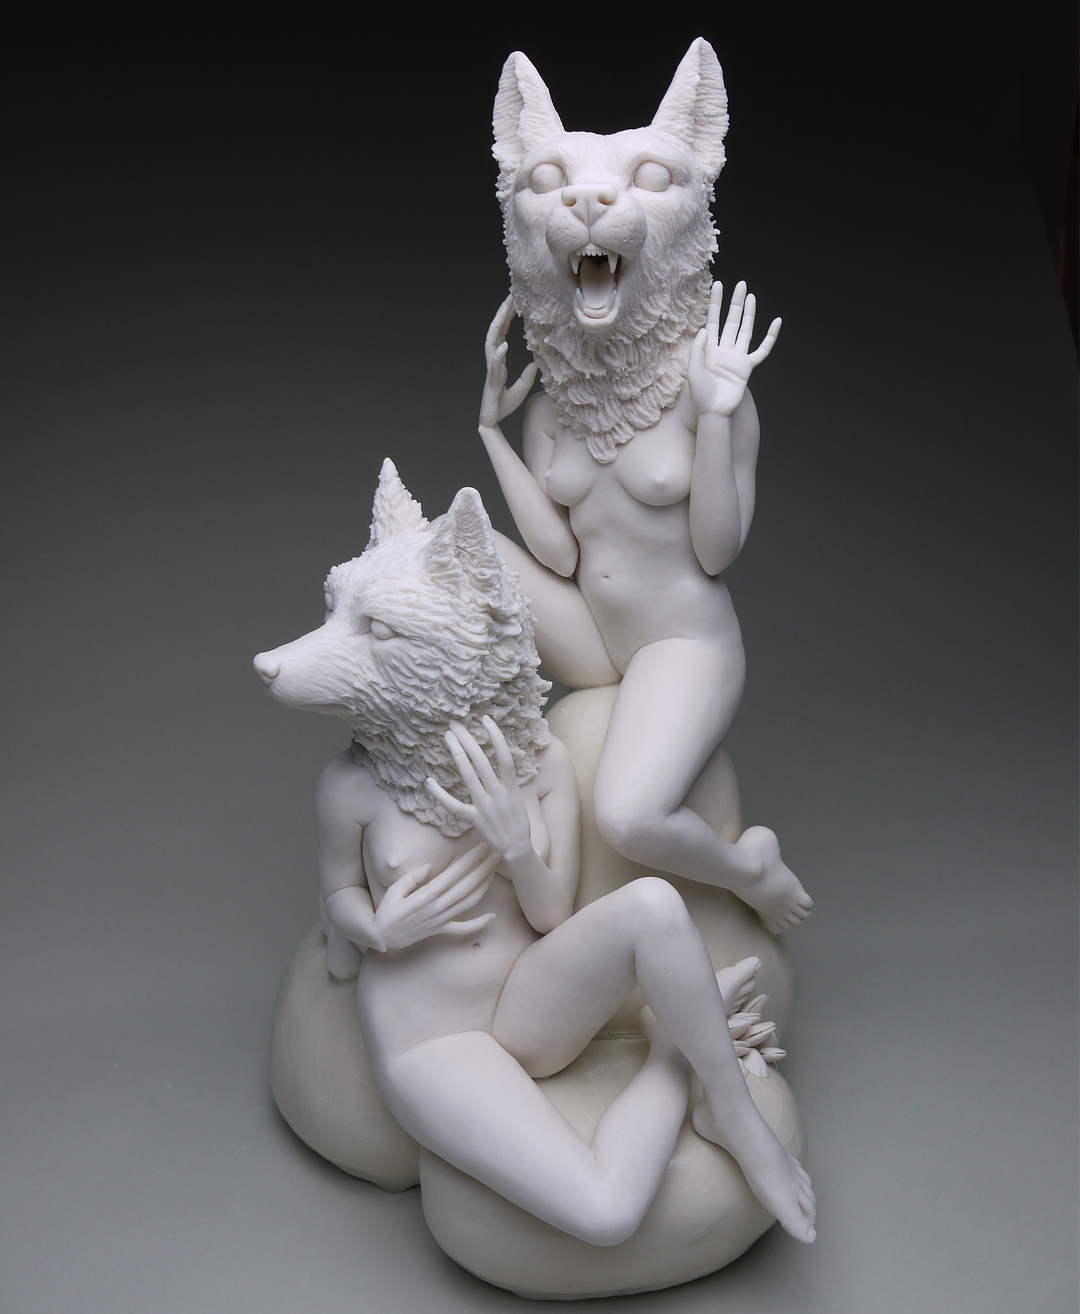 Crystal Morey Artist Sculptor – Entangled Wonders A Vision of the Present and Future